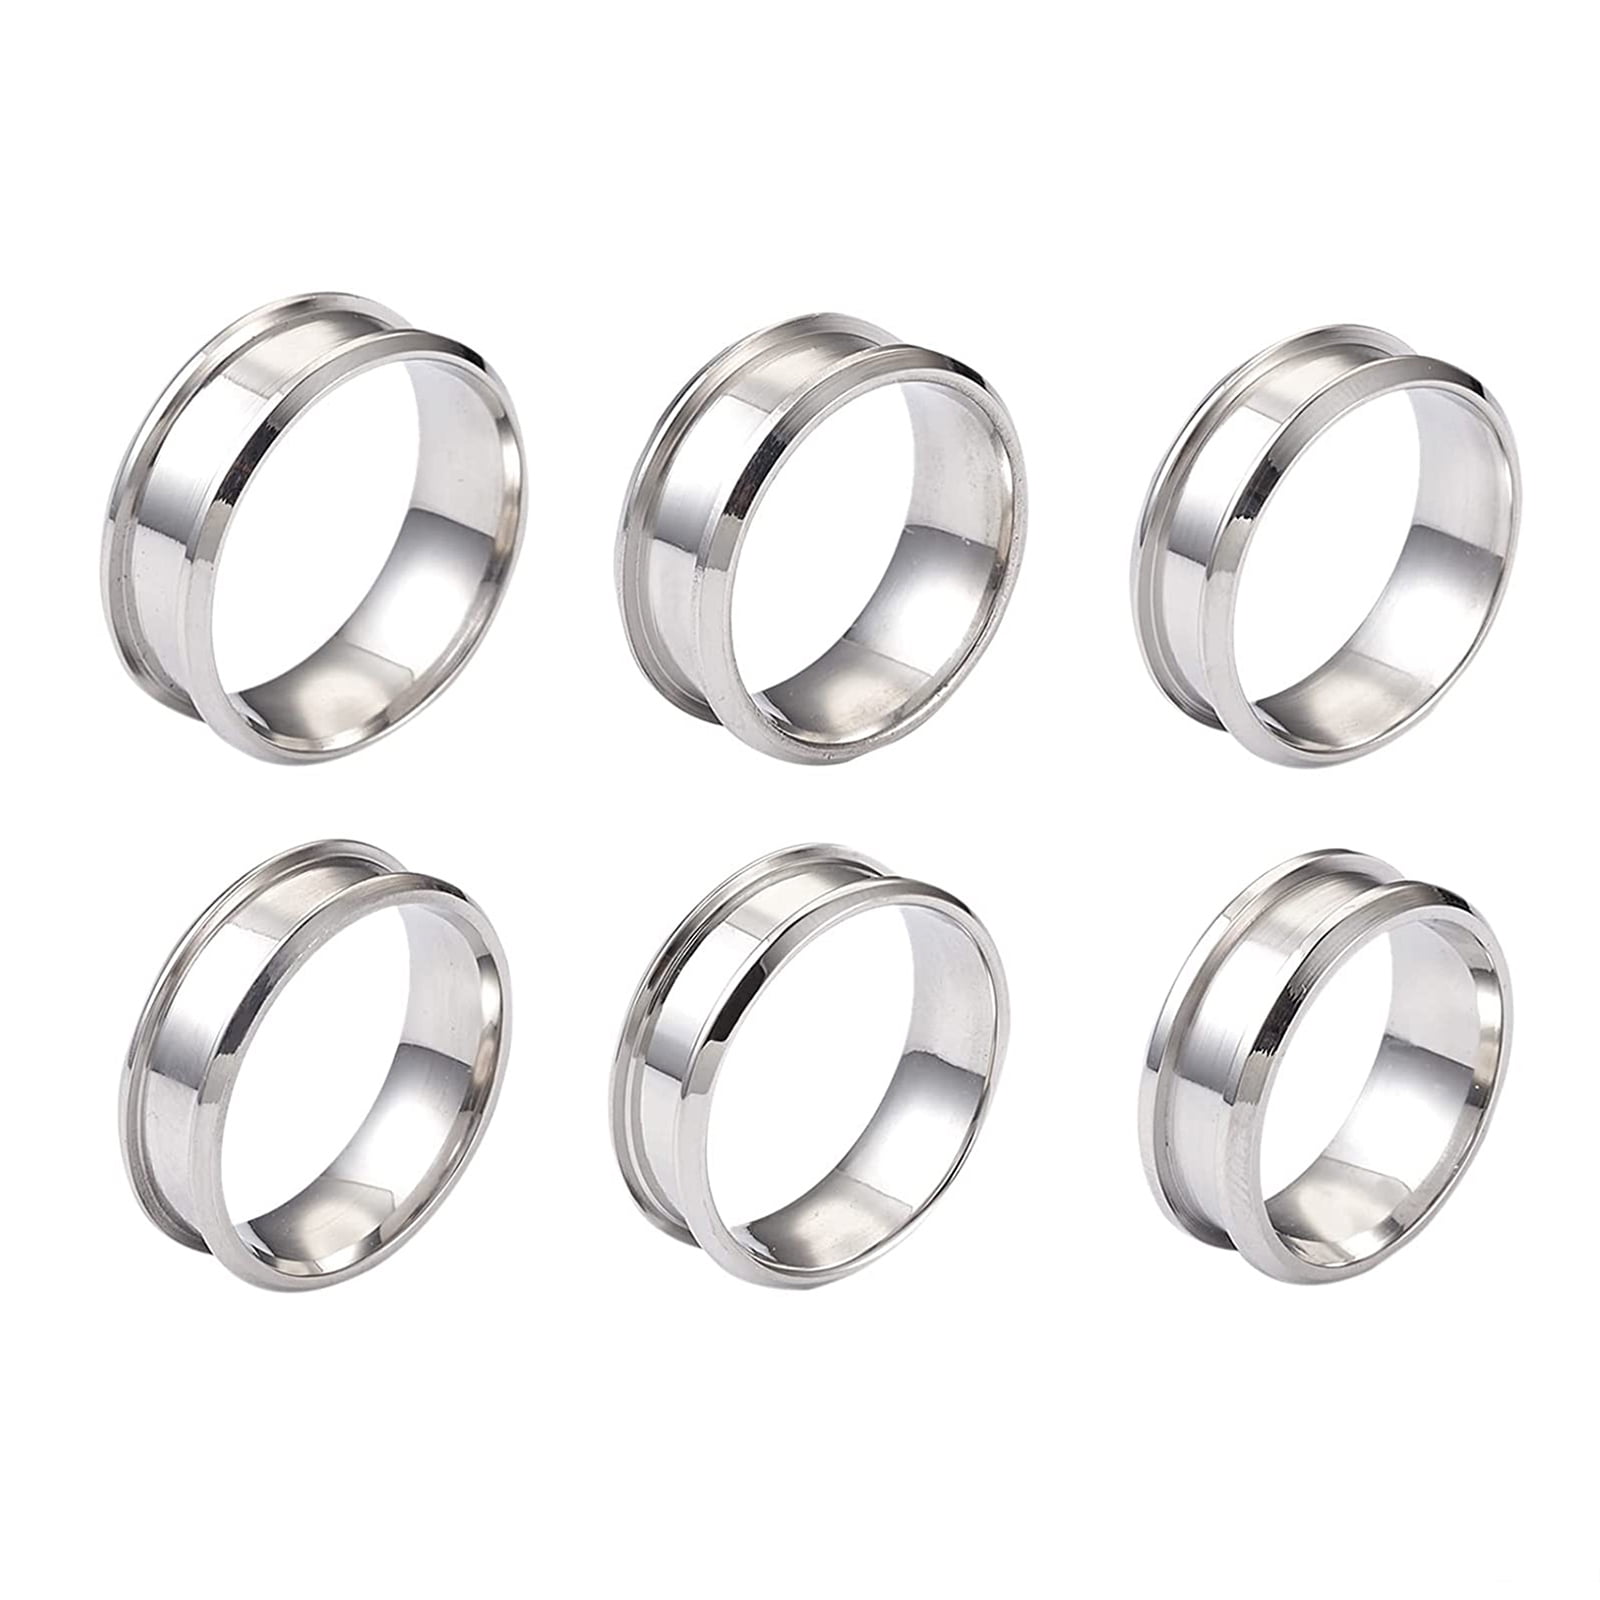 The Original Ring Adjusters Assorted Sizes 